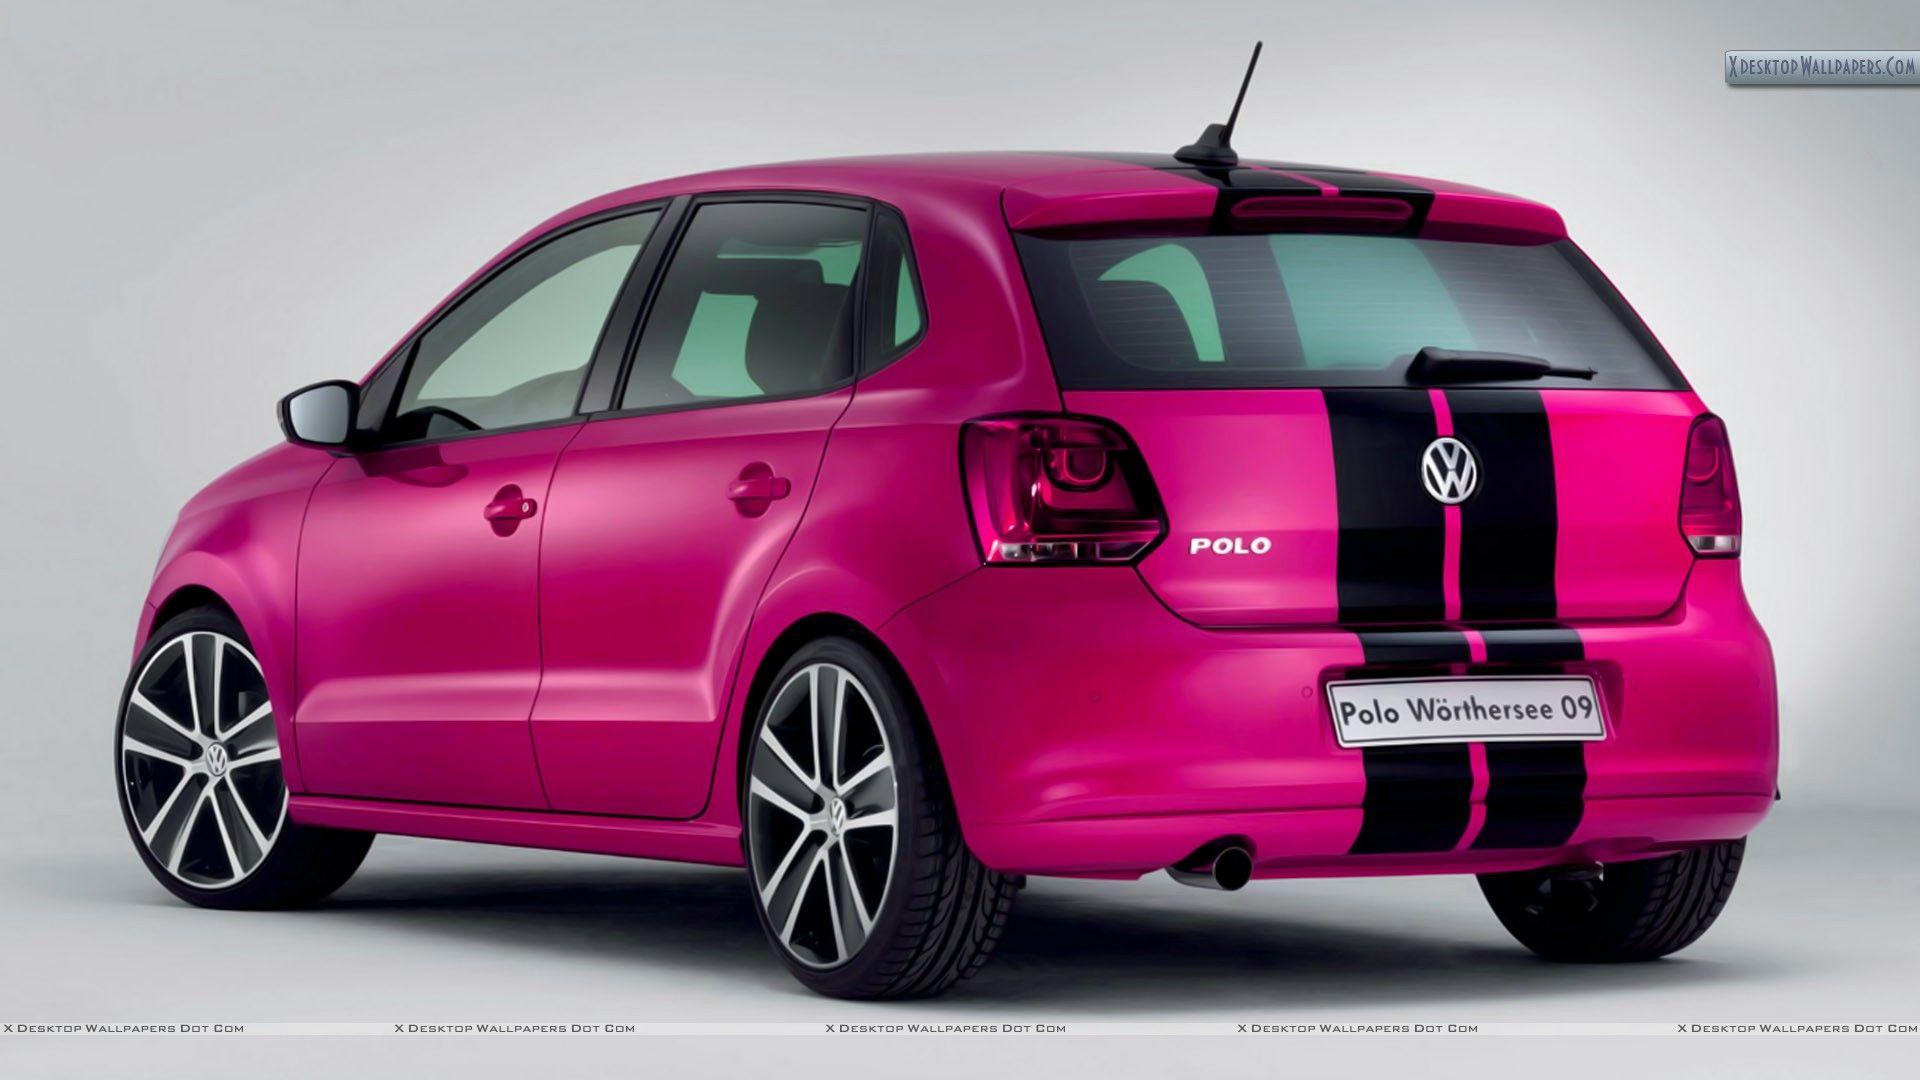 Volkswagen Polo Worthersee 09 Concept In Pink Color Car